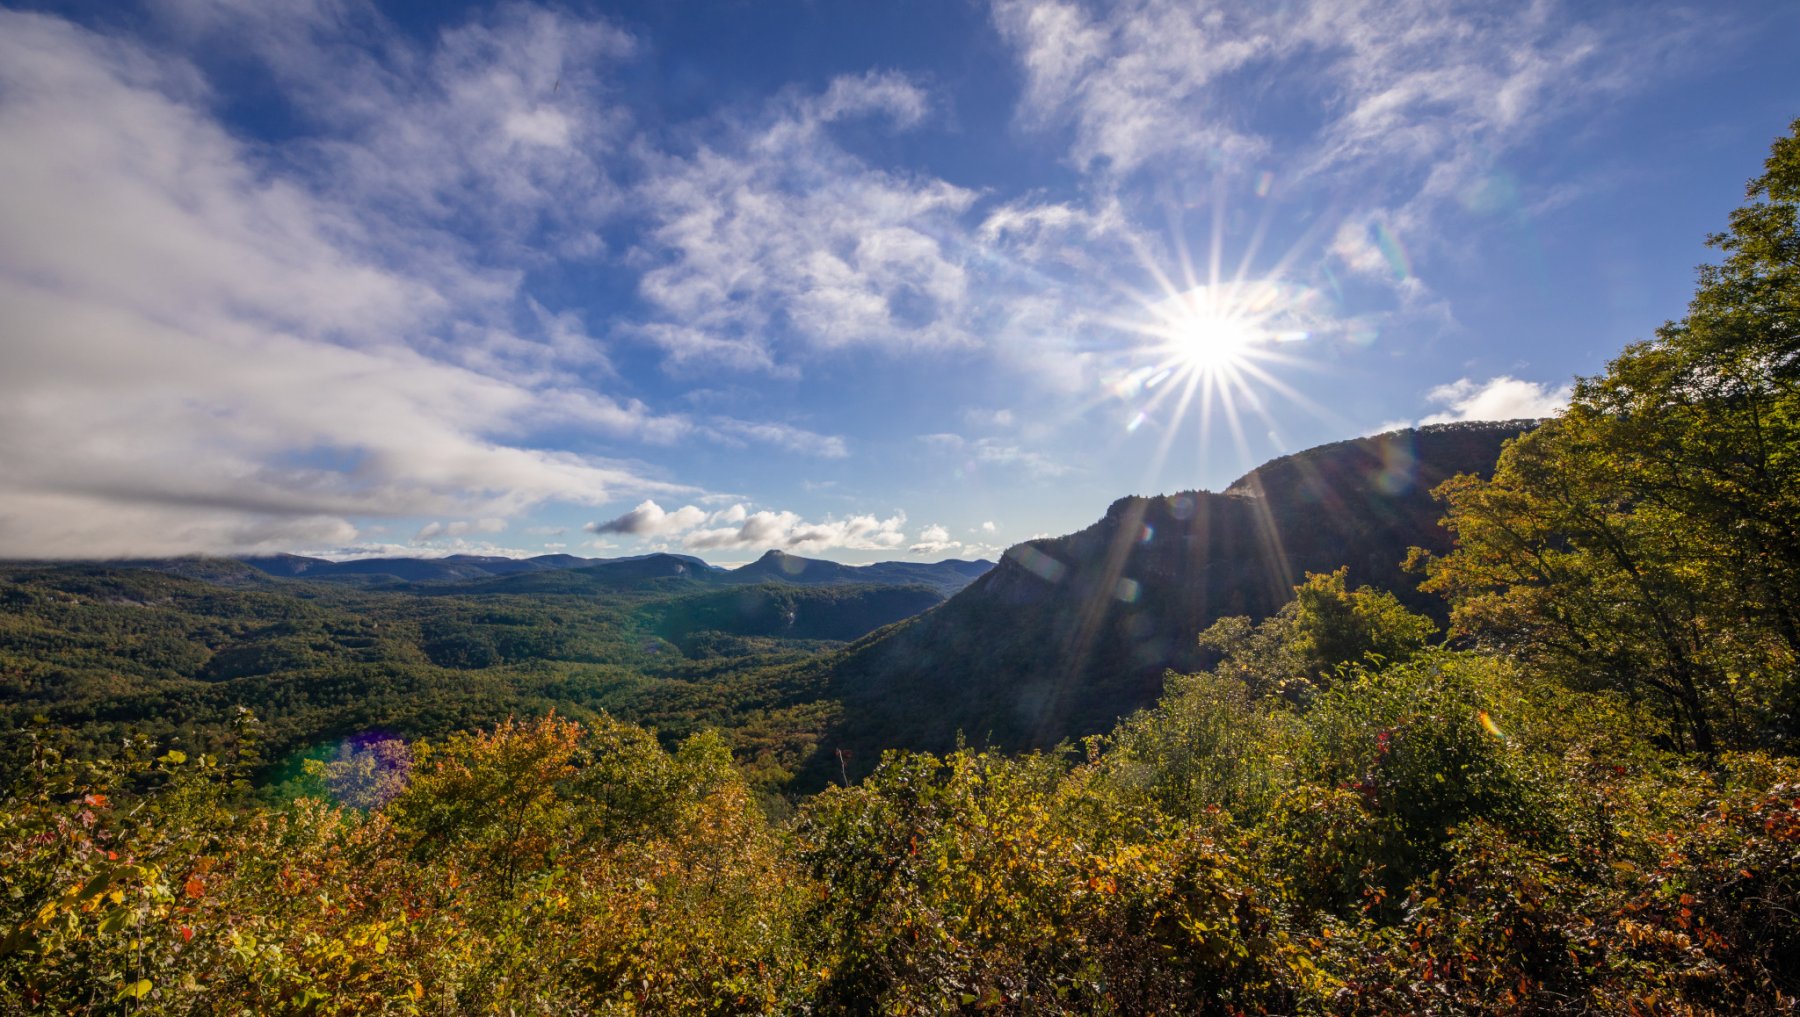 Sun shining bright over mountains and fall foliage